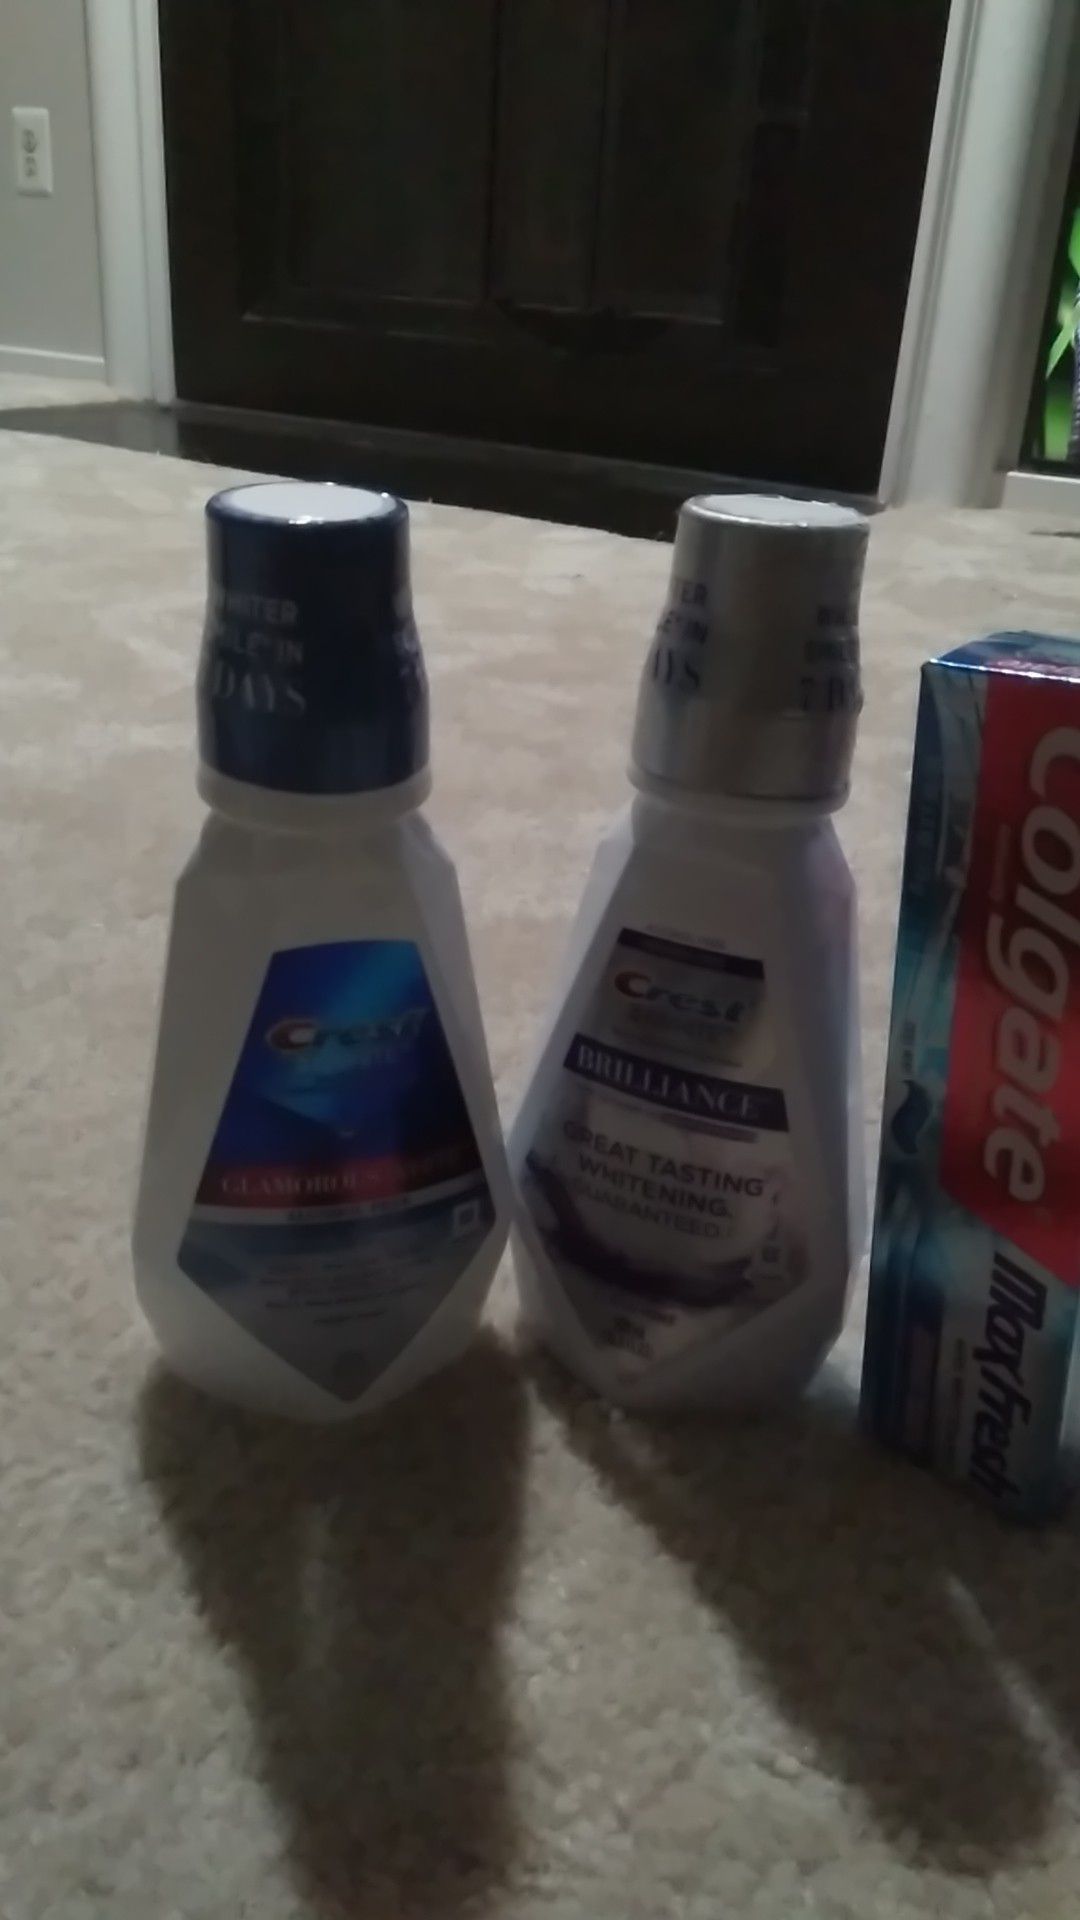 Mouthwash and toothpaste